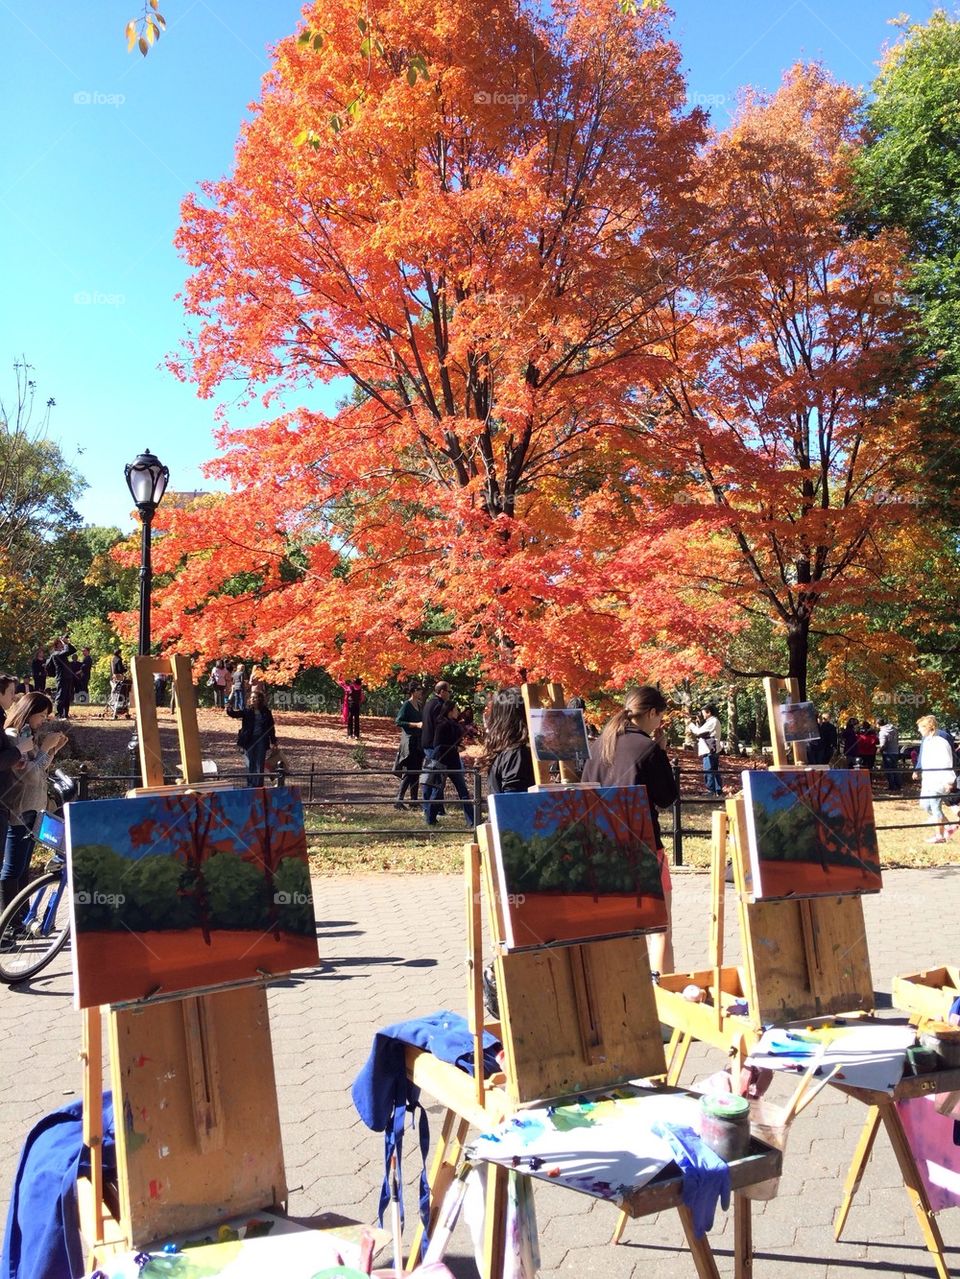 Paintings in the park.